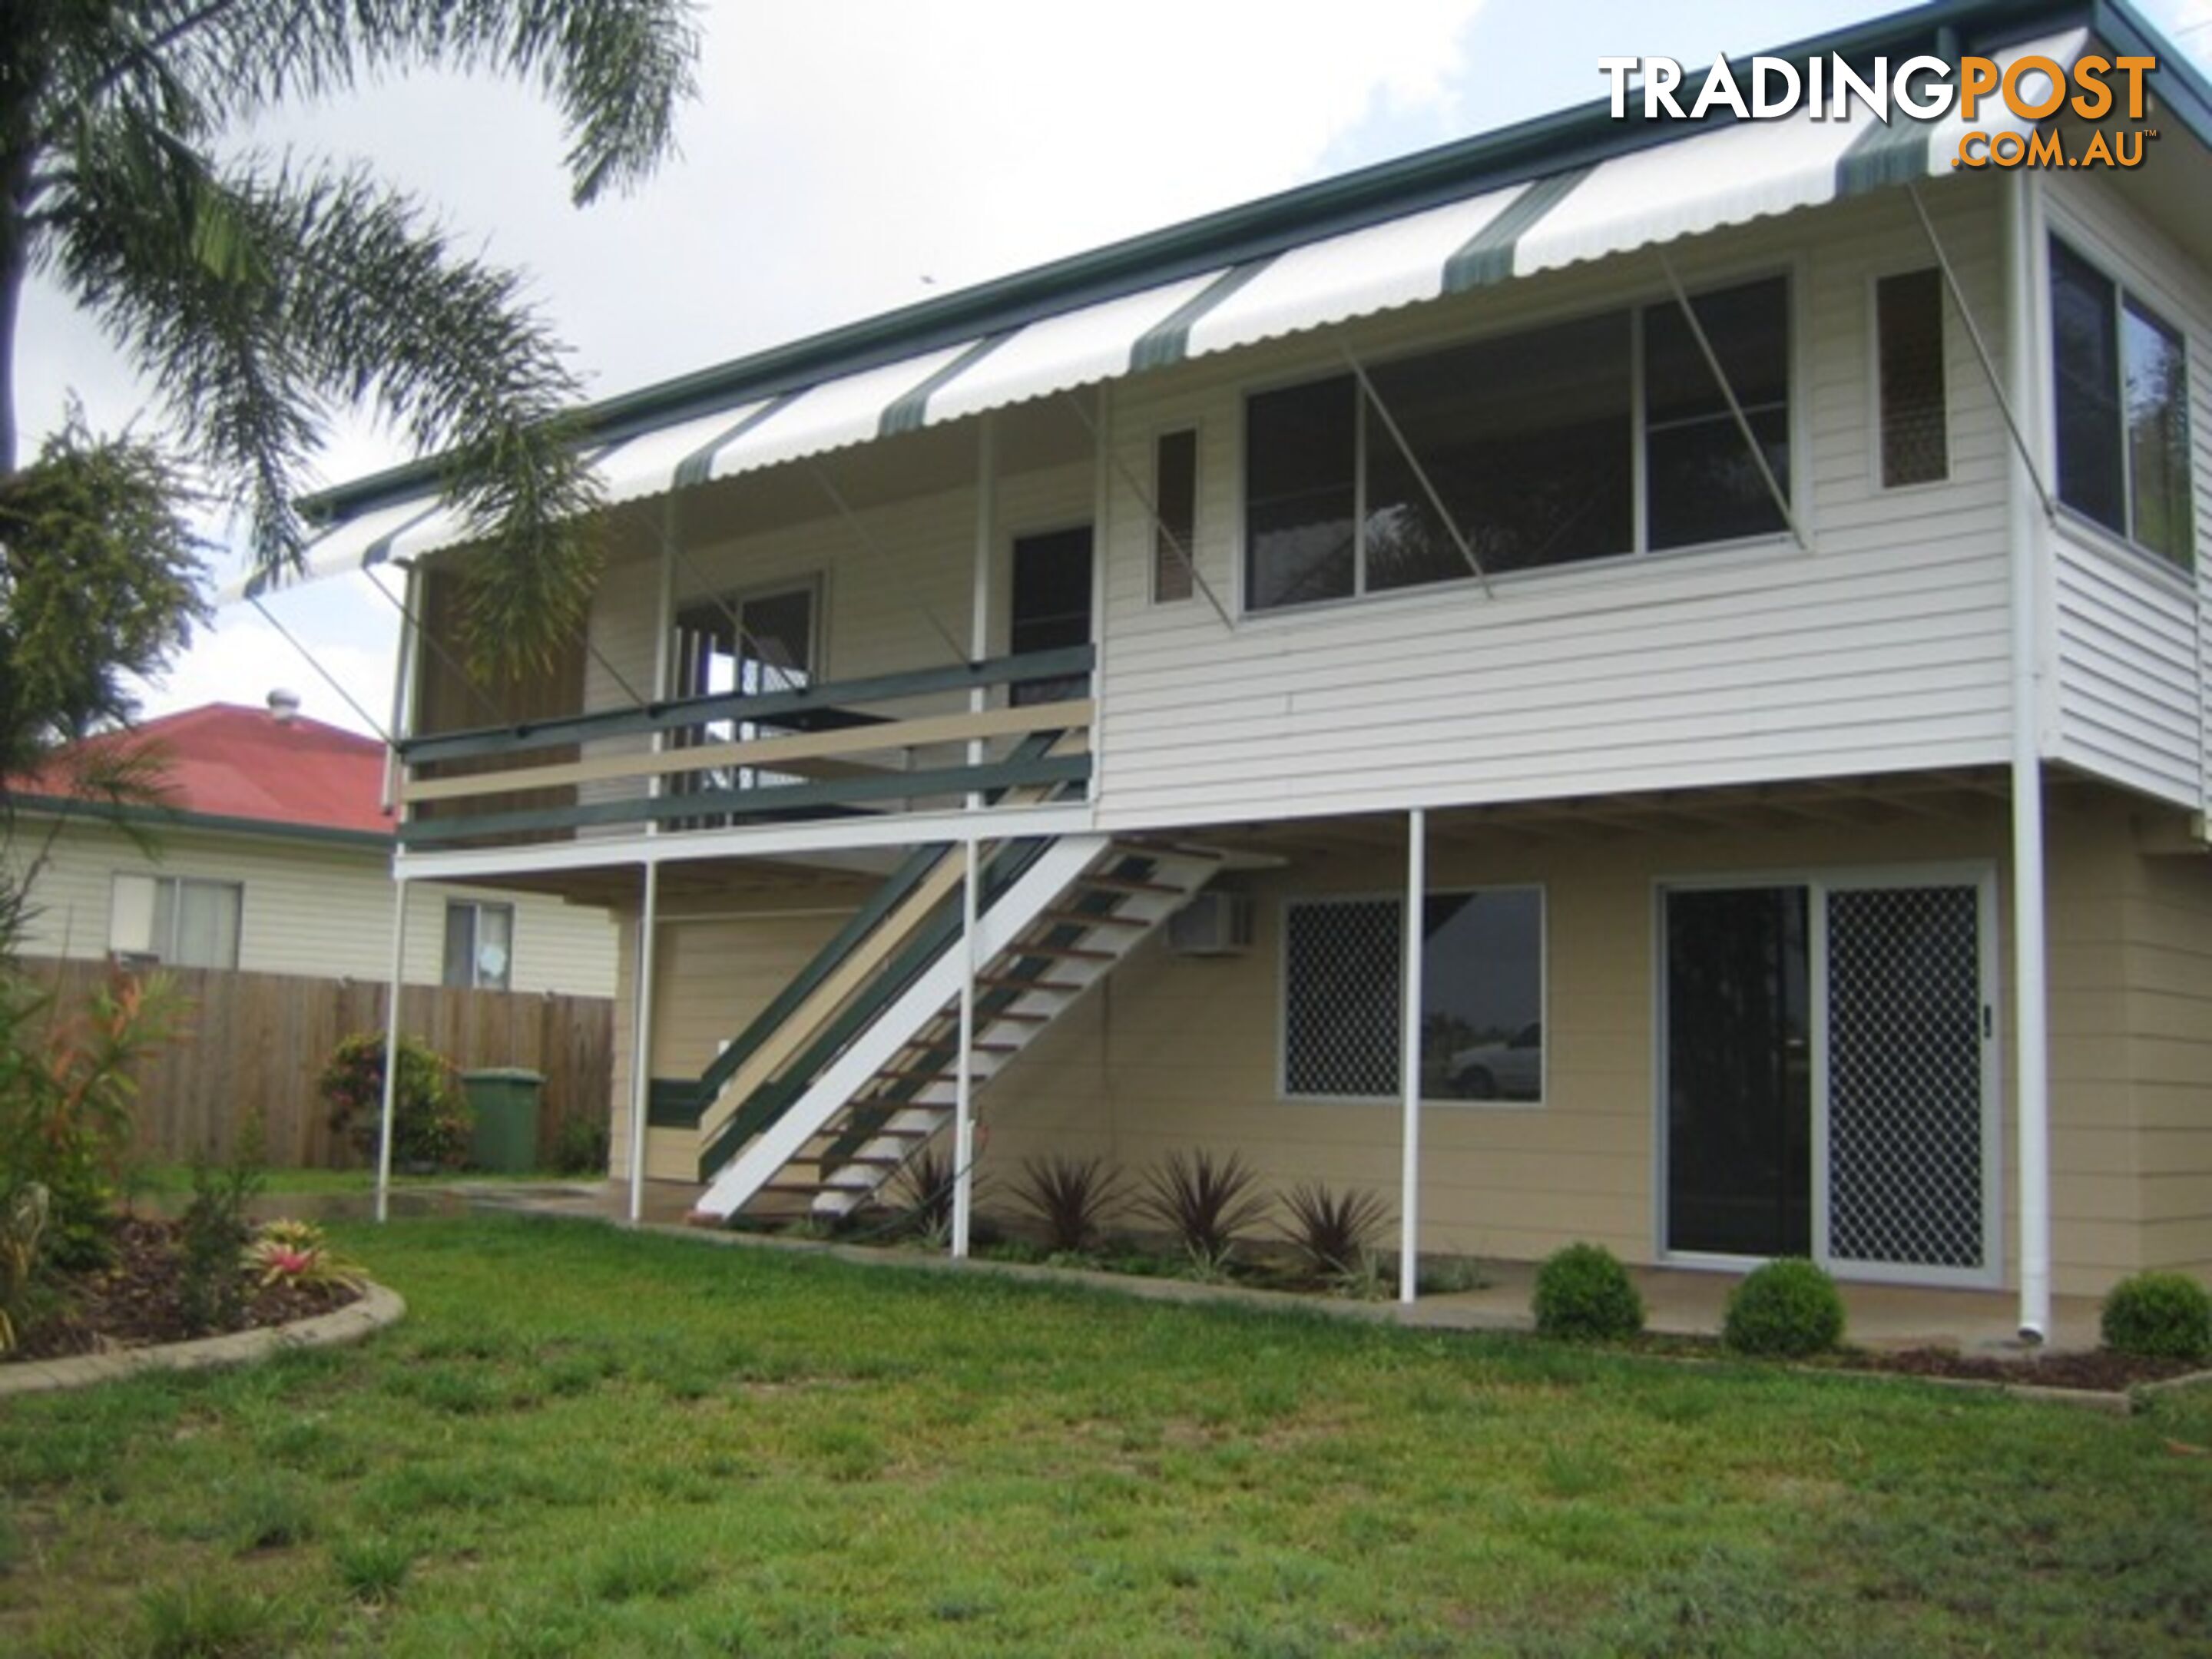 151 Broadsound Road PAGET QLD 4740